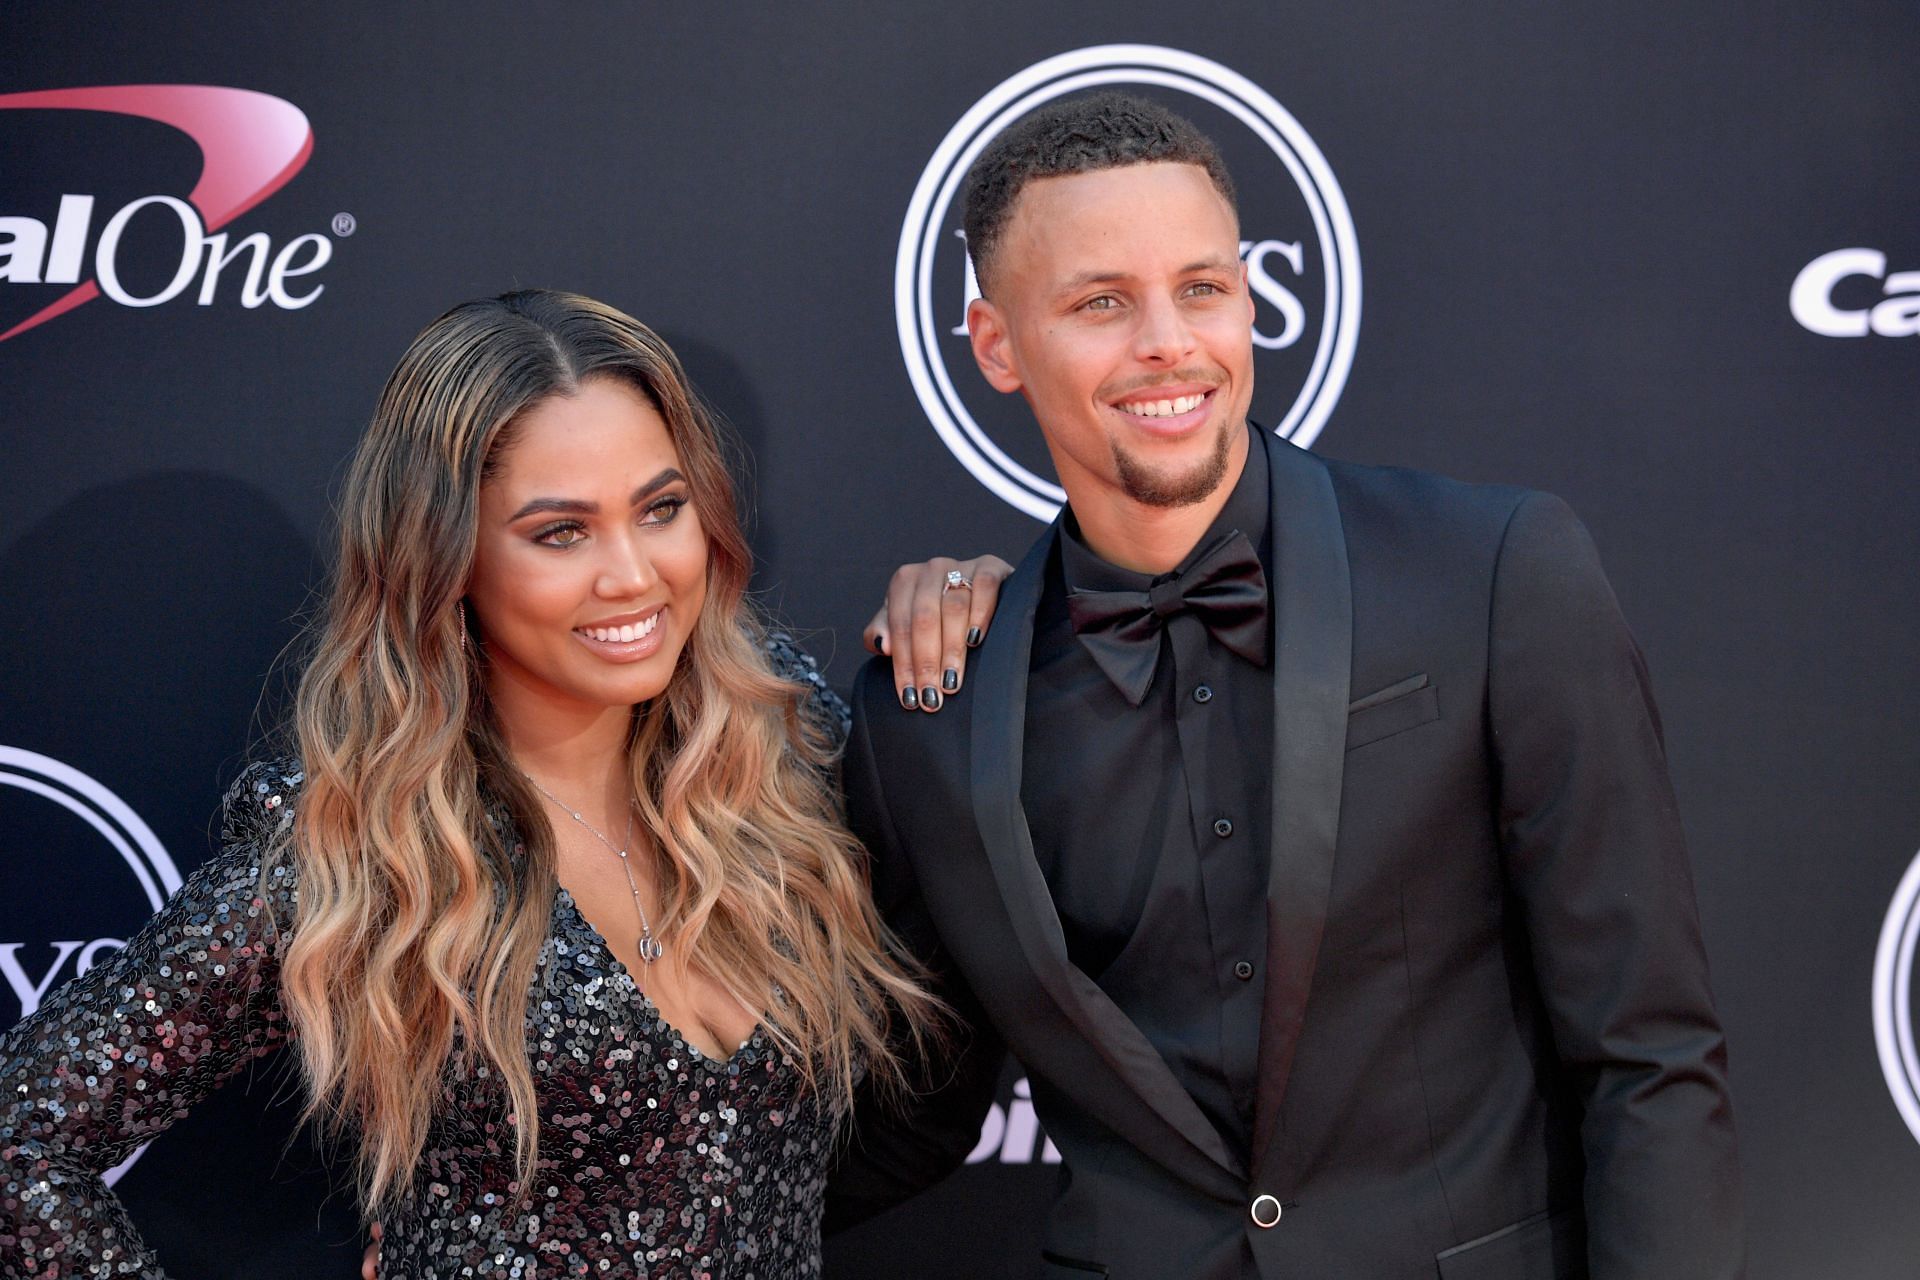 Ayesha and Steph Curry at the 2017 ESPYS.